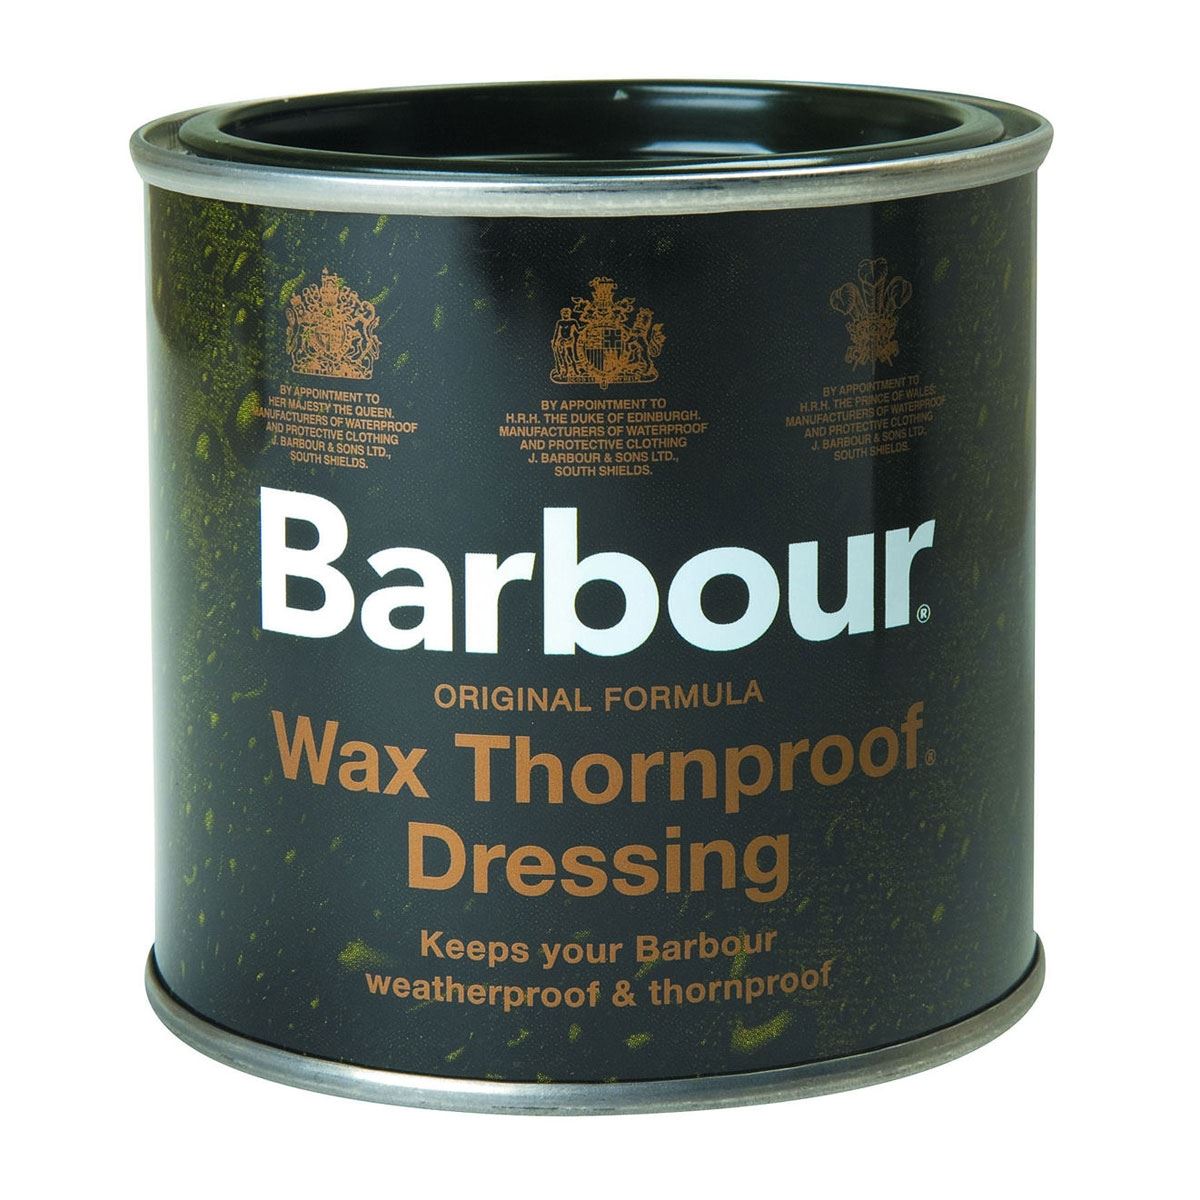 How to apply Barbour wax for Thornproof Dressing?